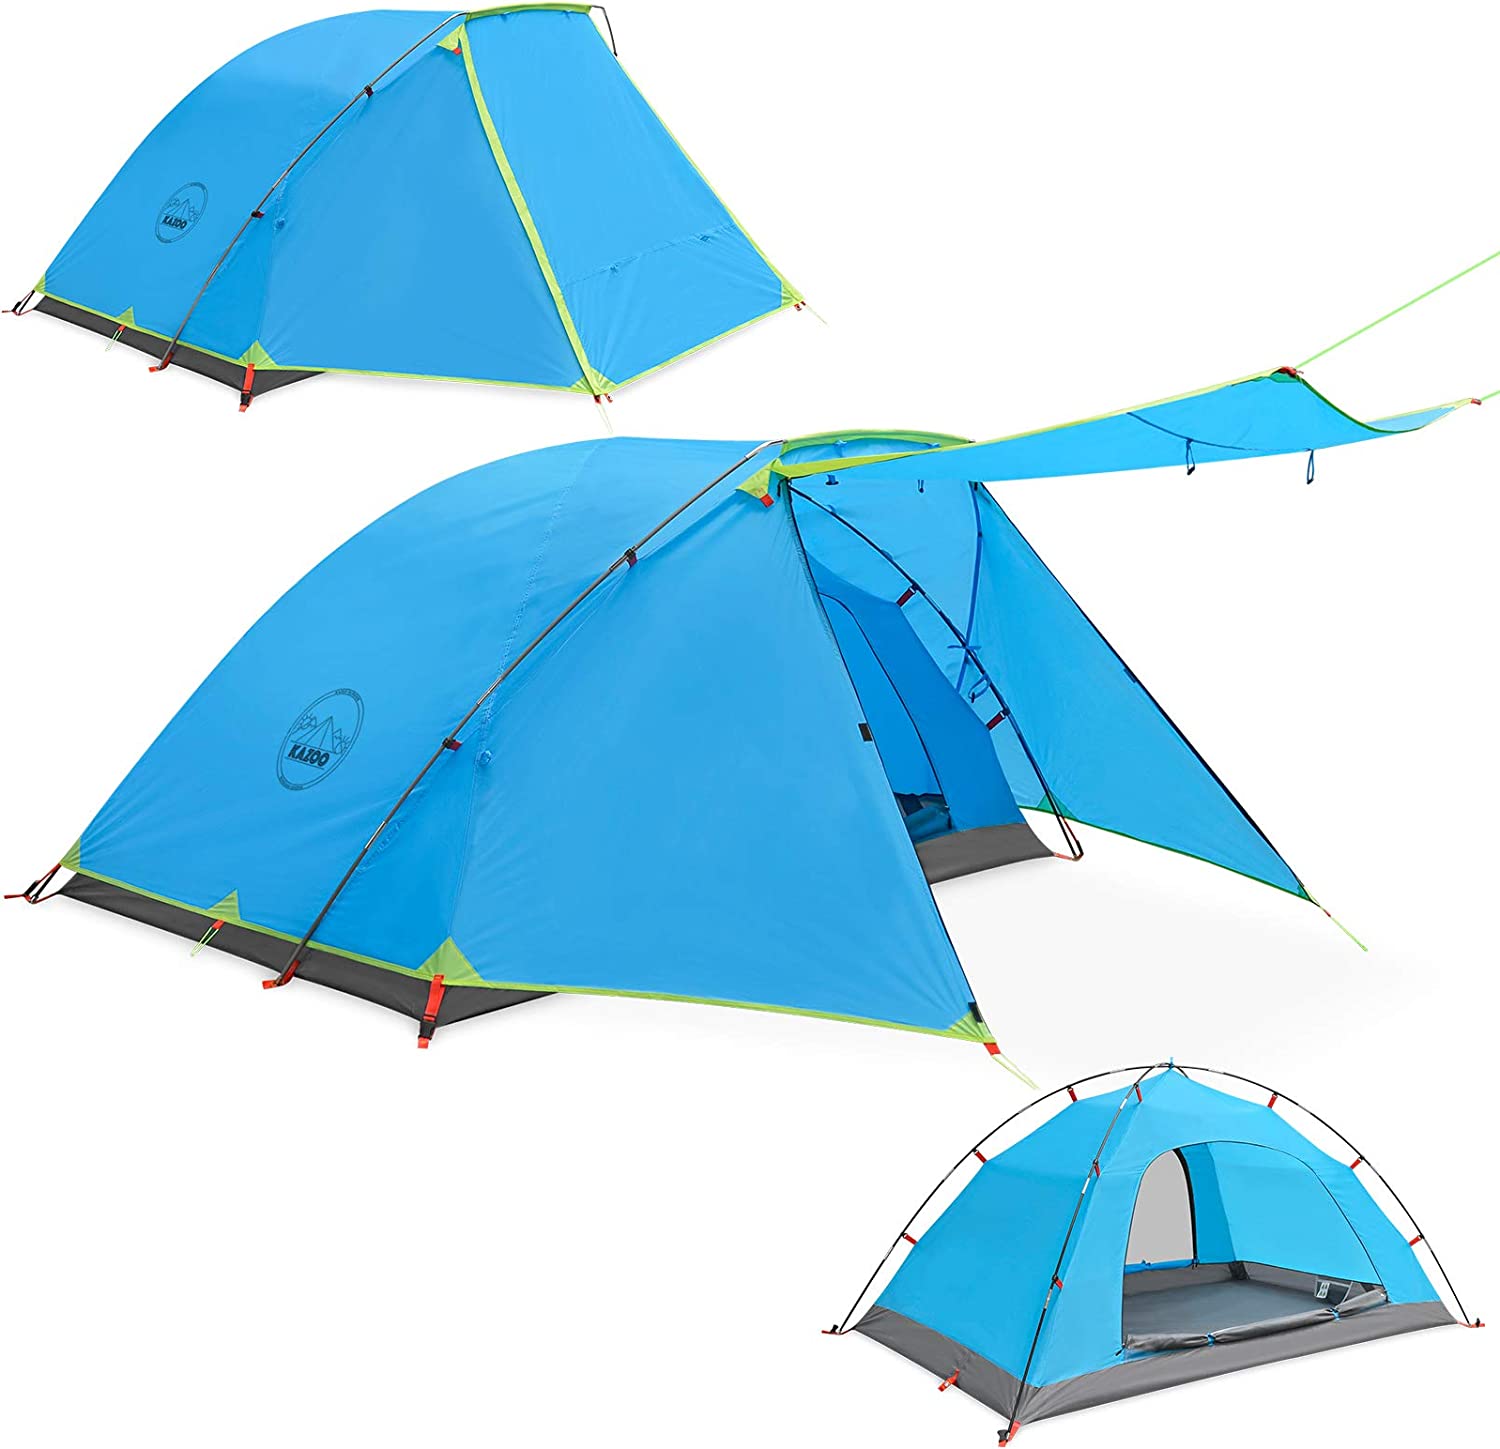  1.KAZOO Outdoor Camping Tent 